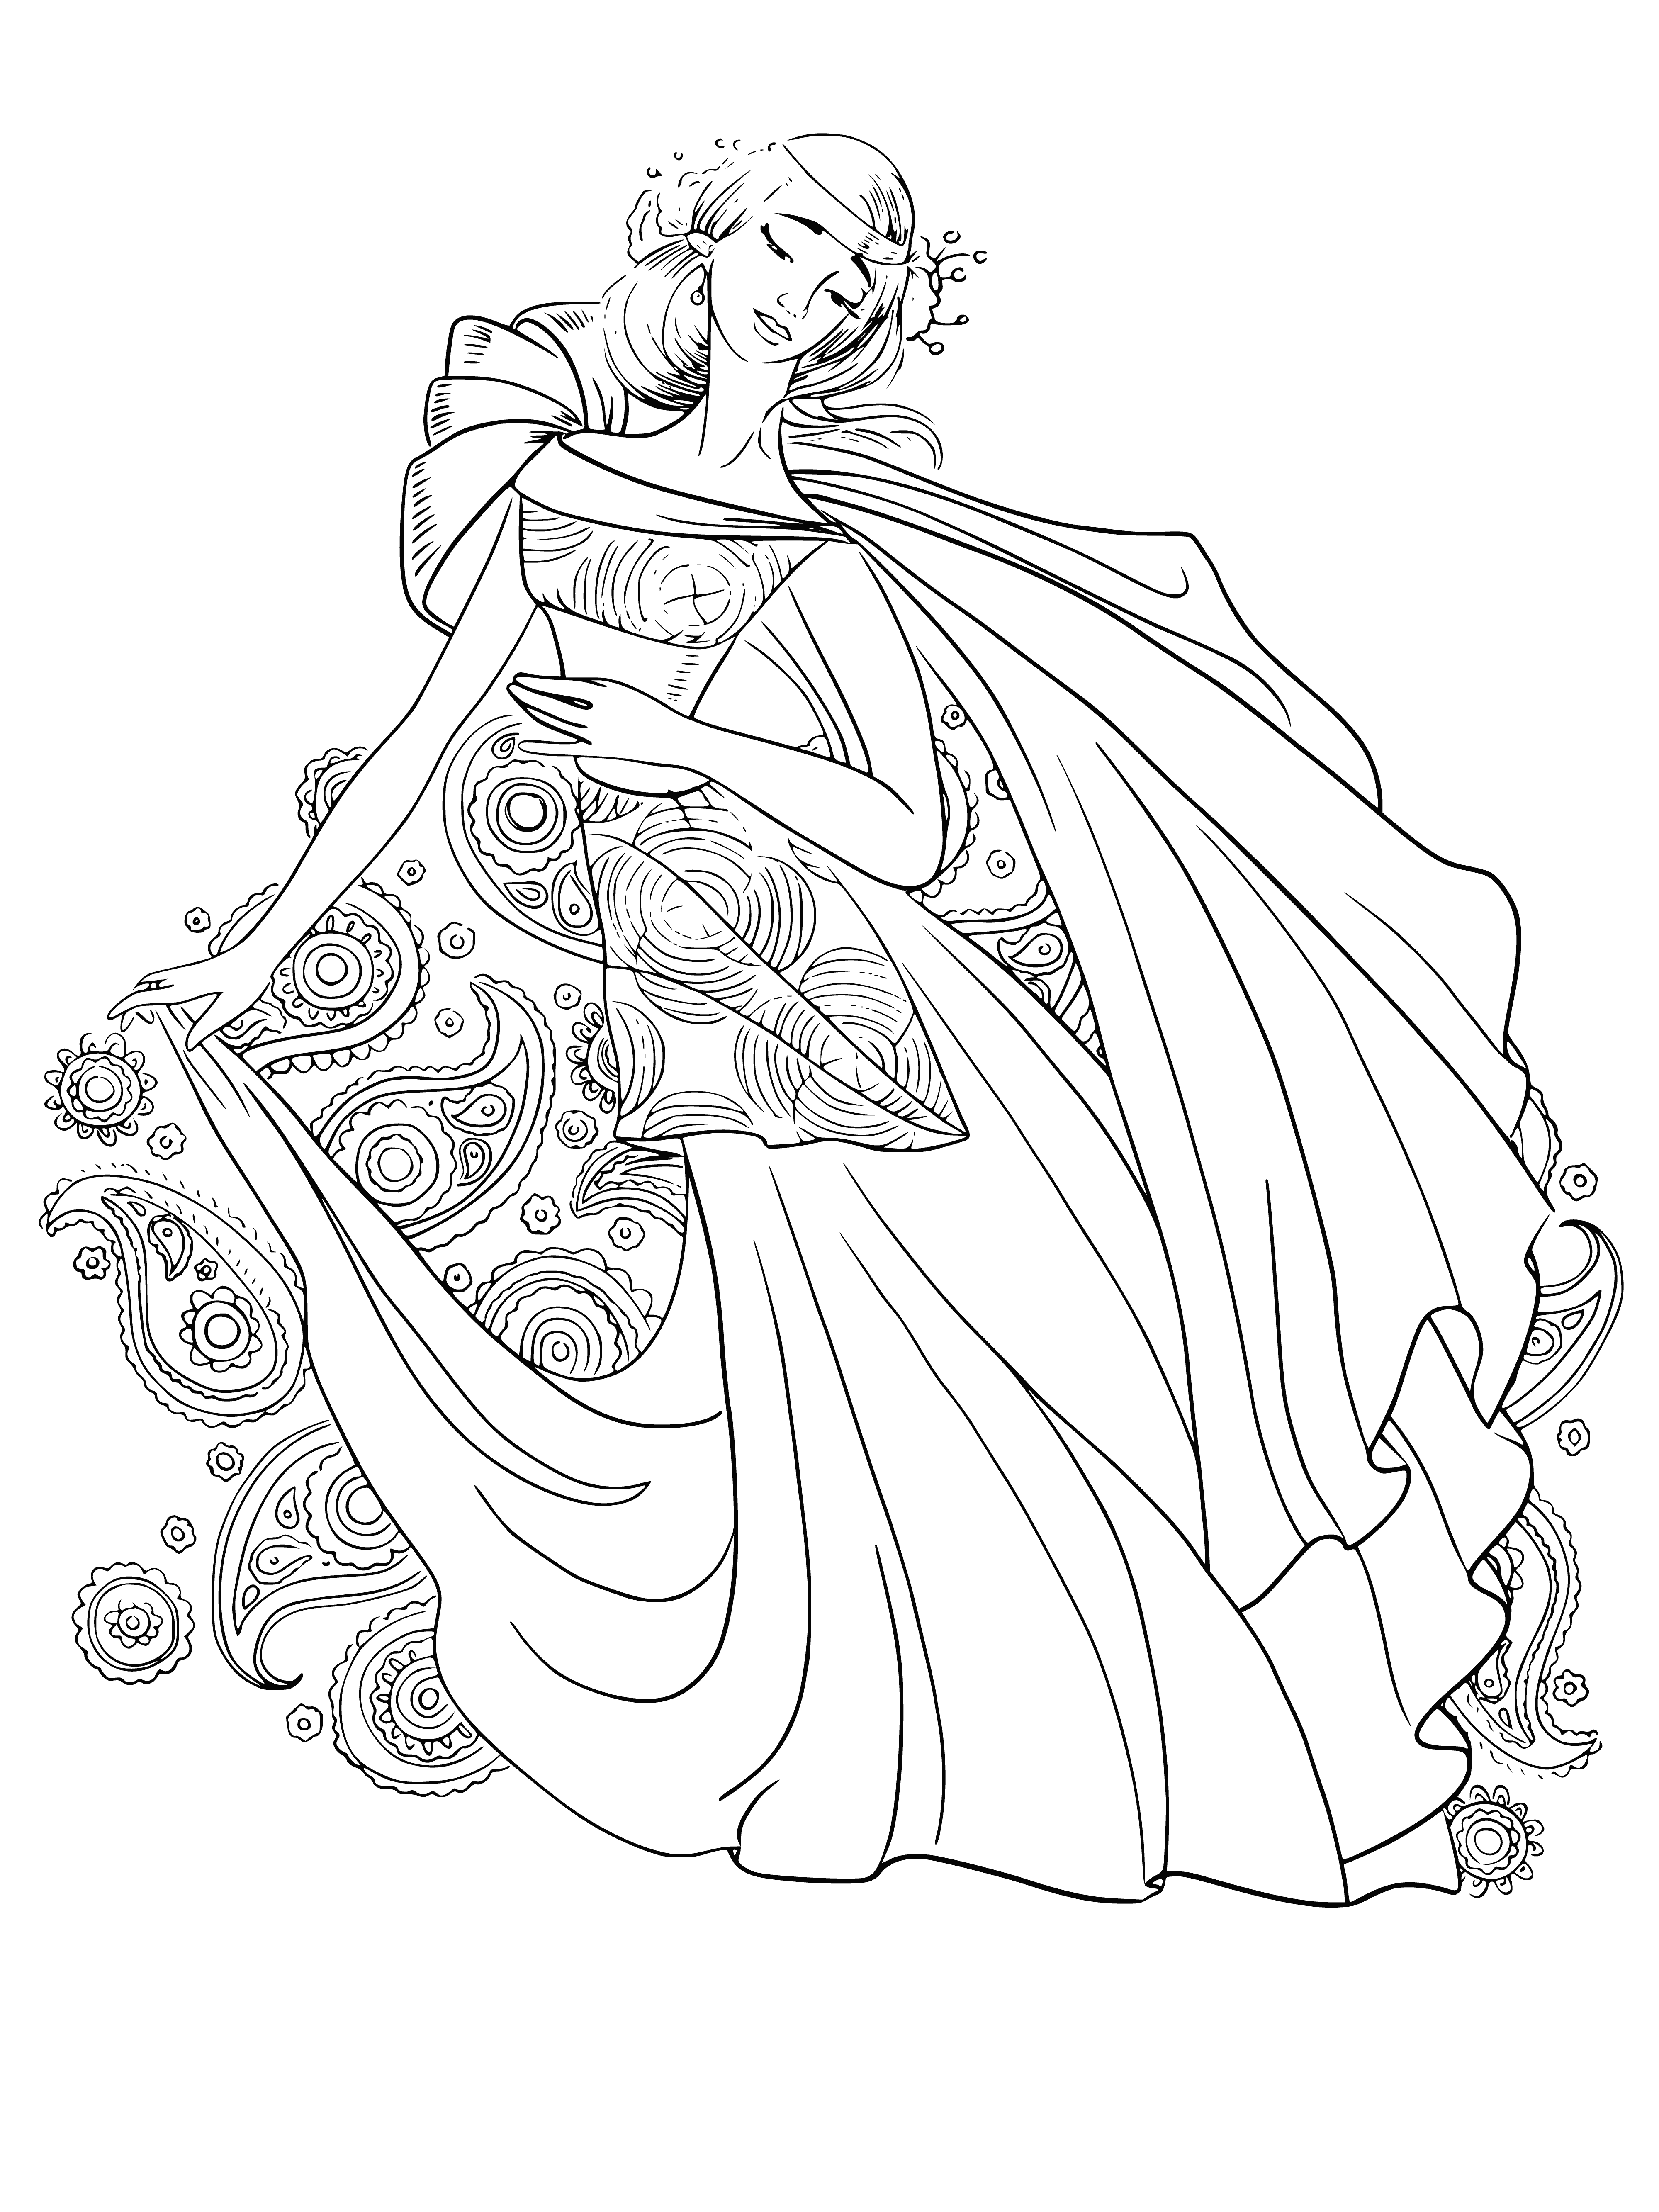 Air outfit coloring page